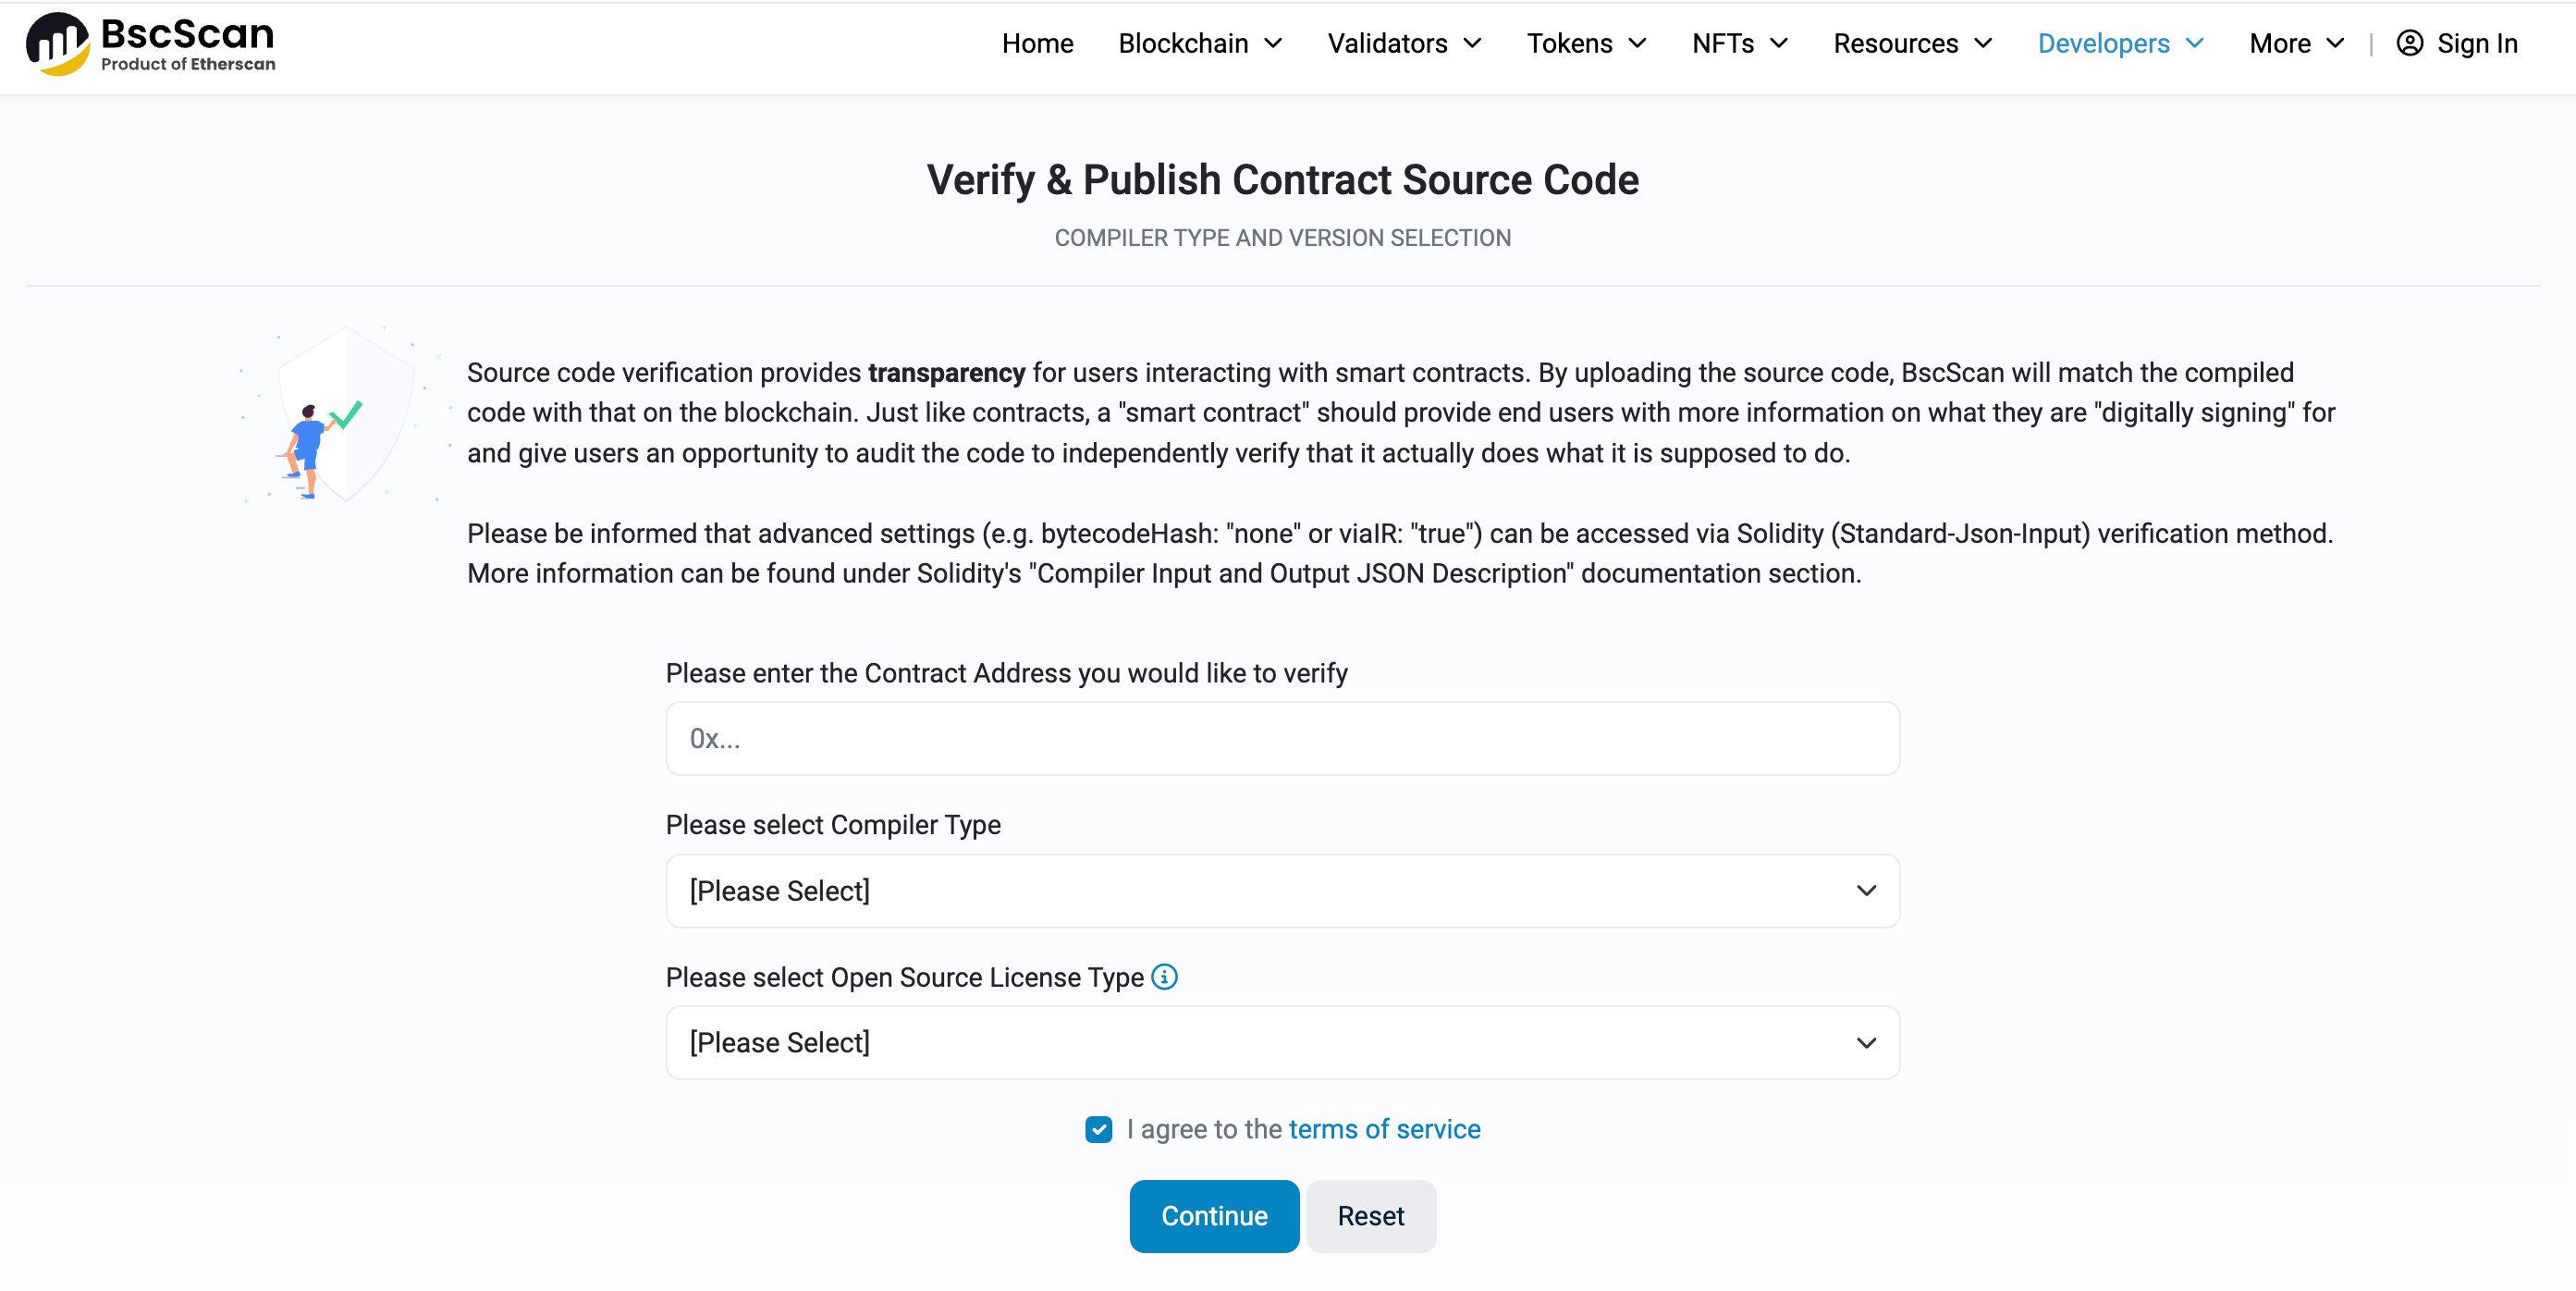 A screenshot of the BscScan smart contract verification landing page